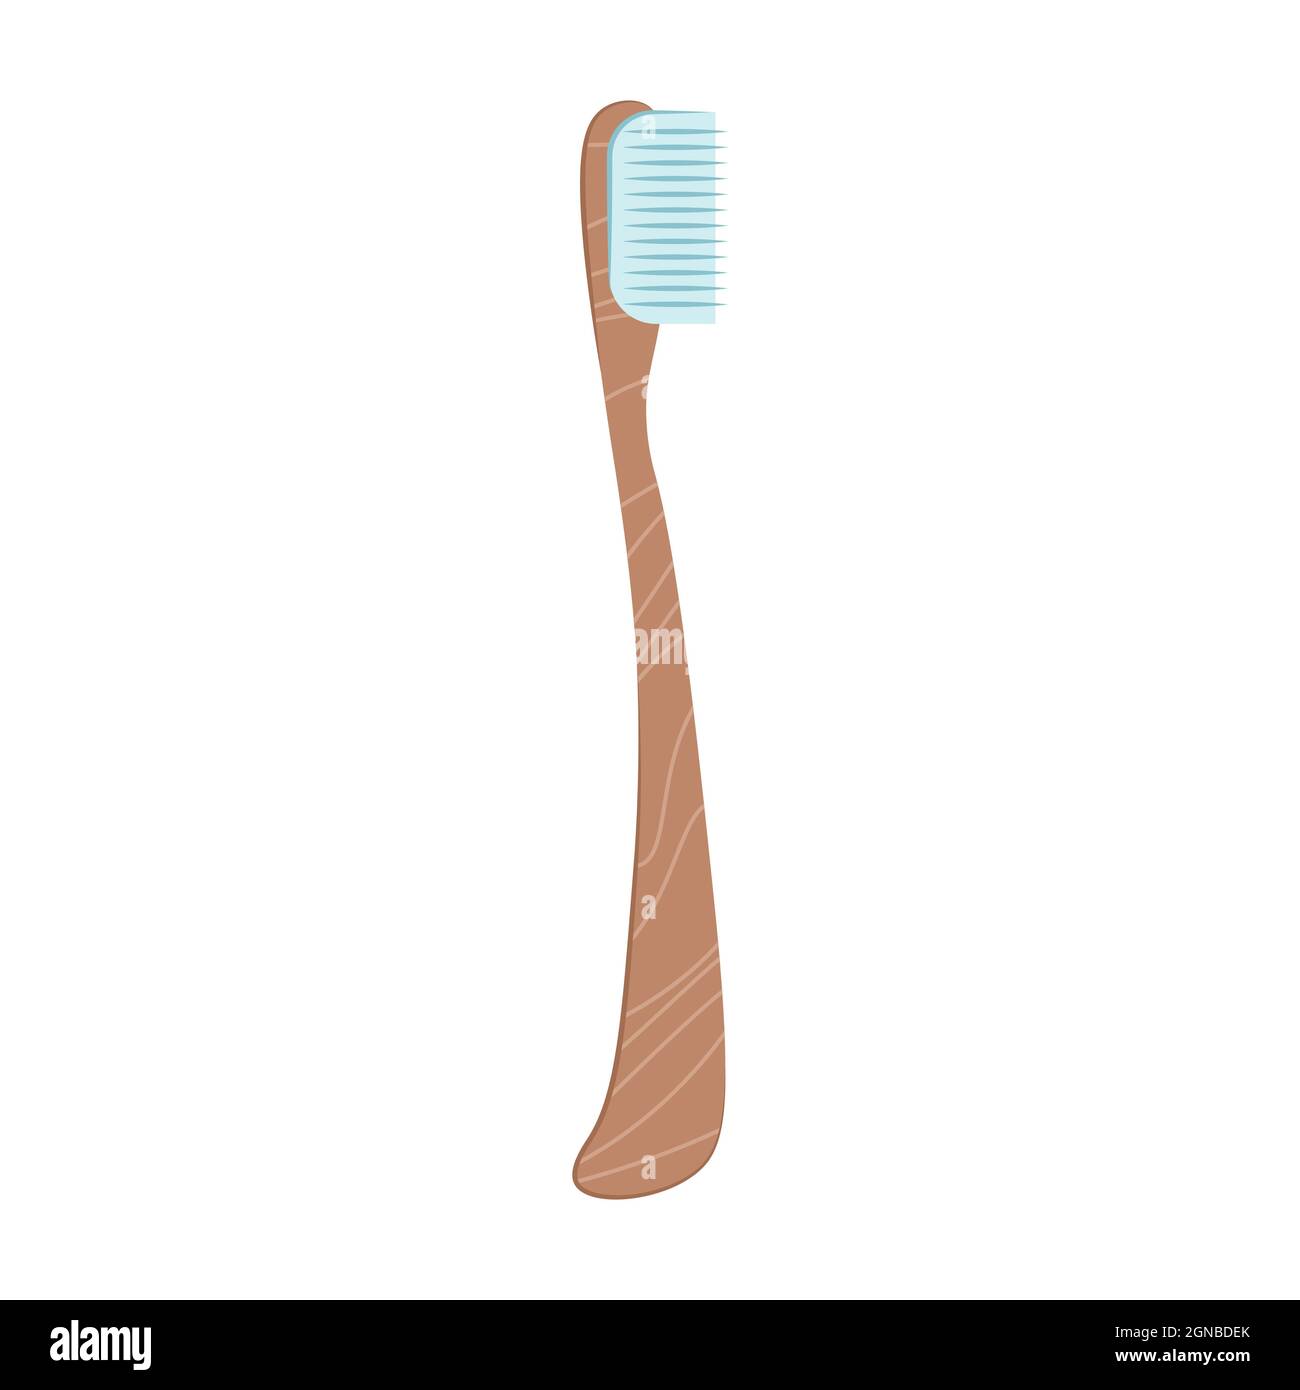 Wooden toothbrush one isolated on white background. Vector flat illustration. Bamboo toothbrush mockup, dental care and oral hygiene stomatological pr Stock Vector